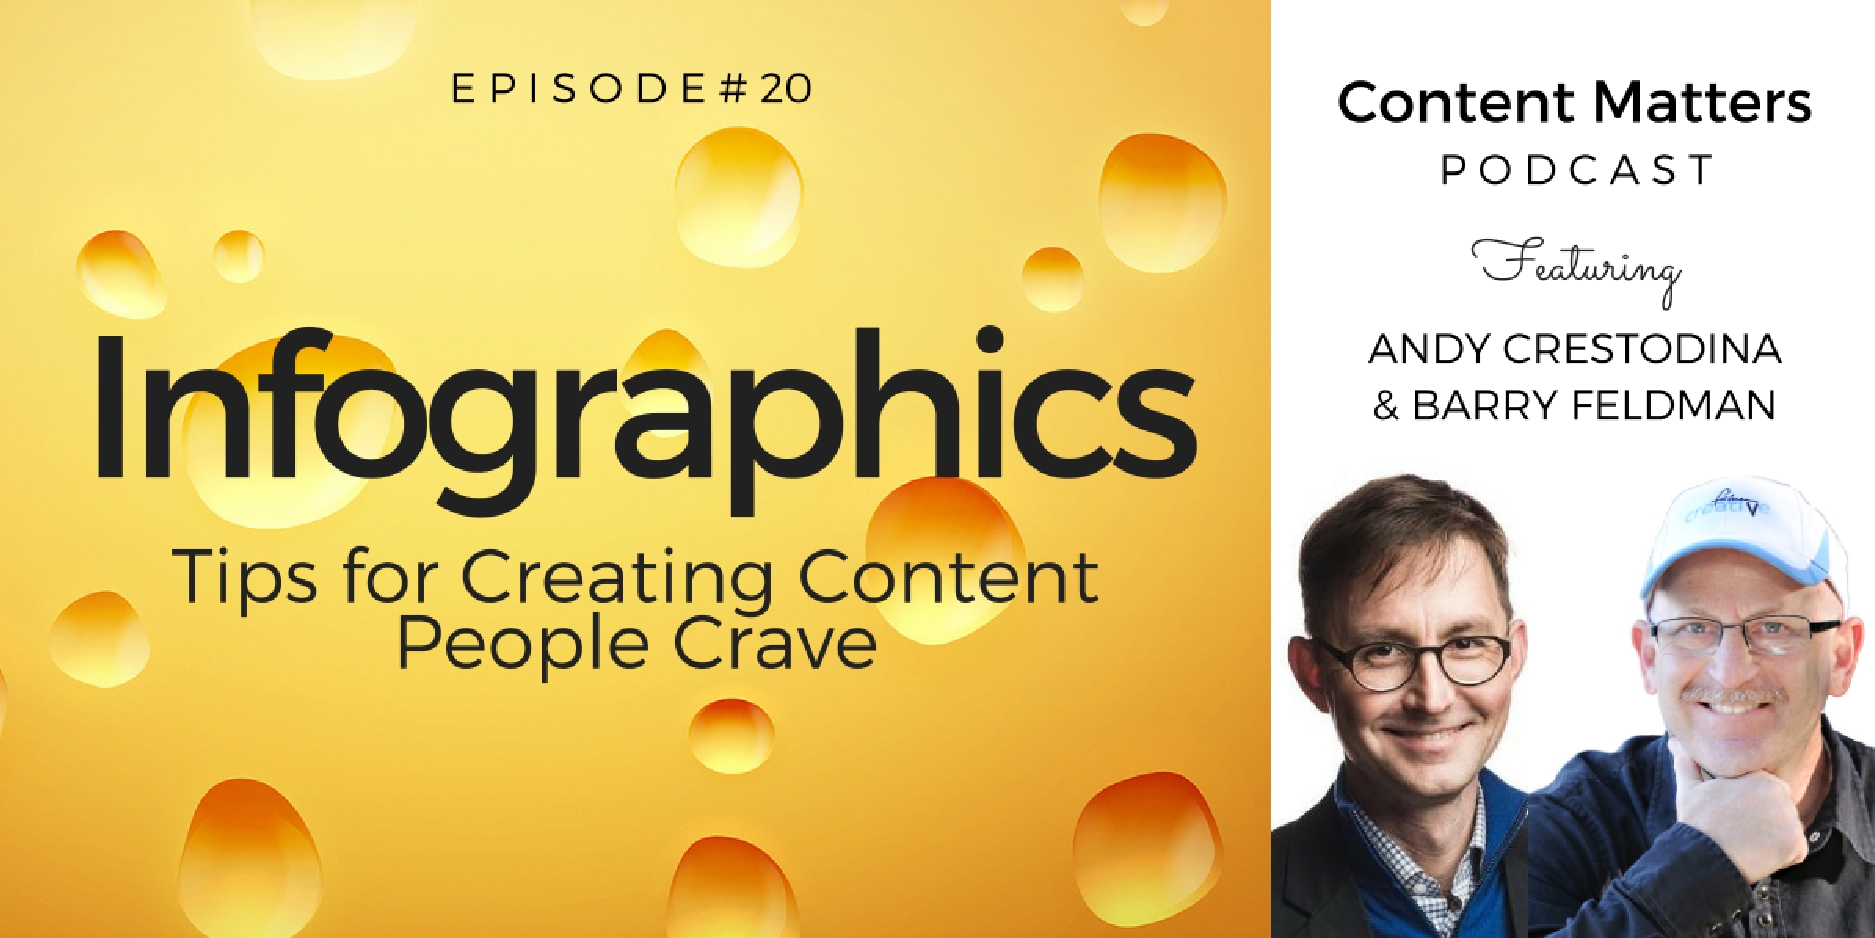 Infographics: Tips for Creating Content People Crave  [Content Matters Episode 20]